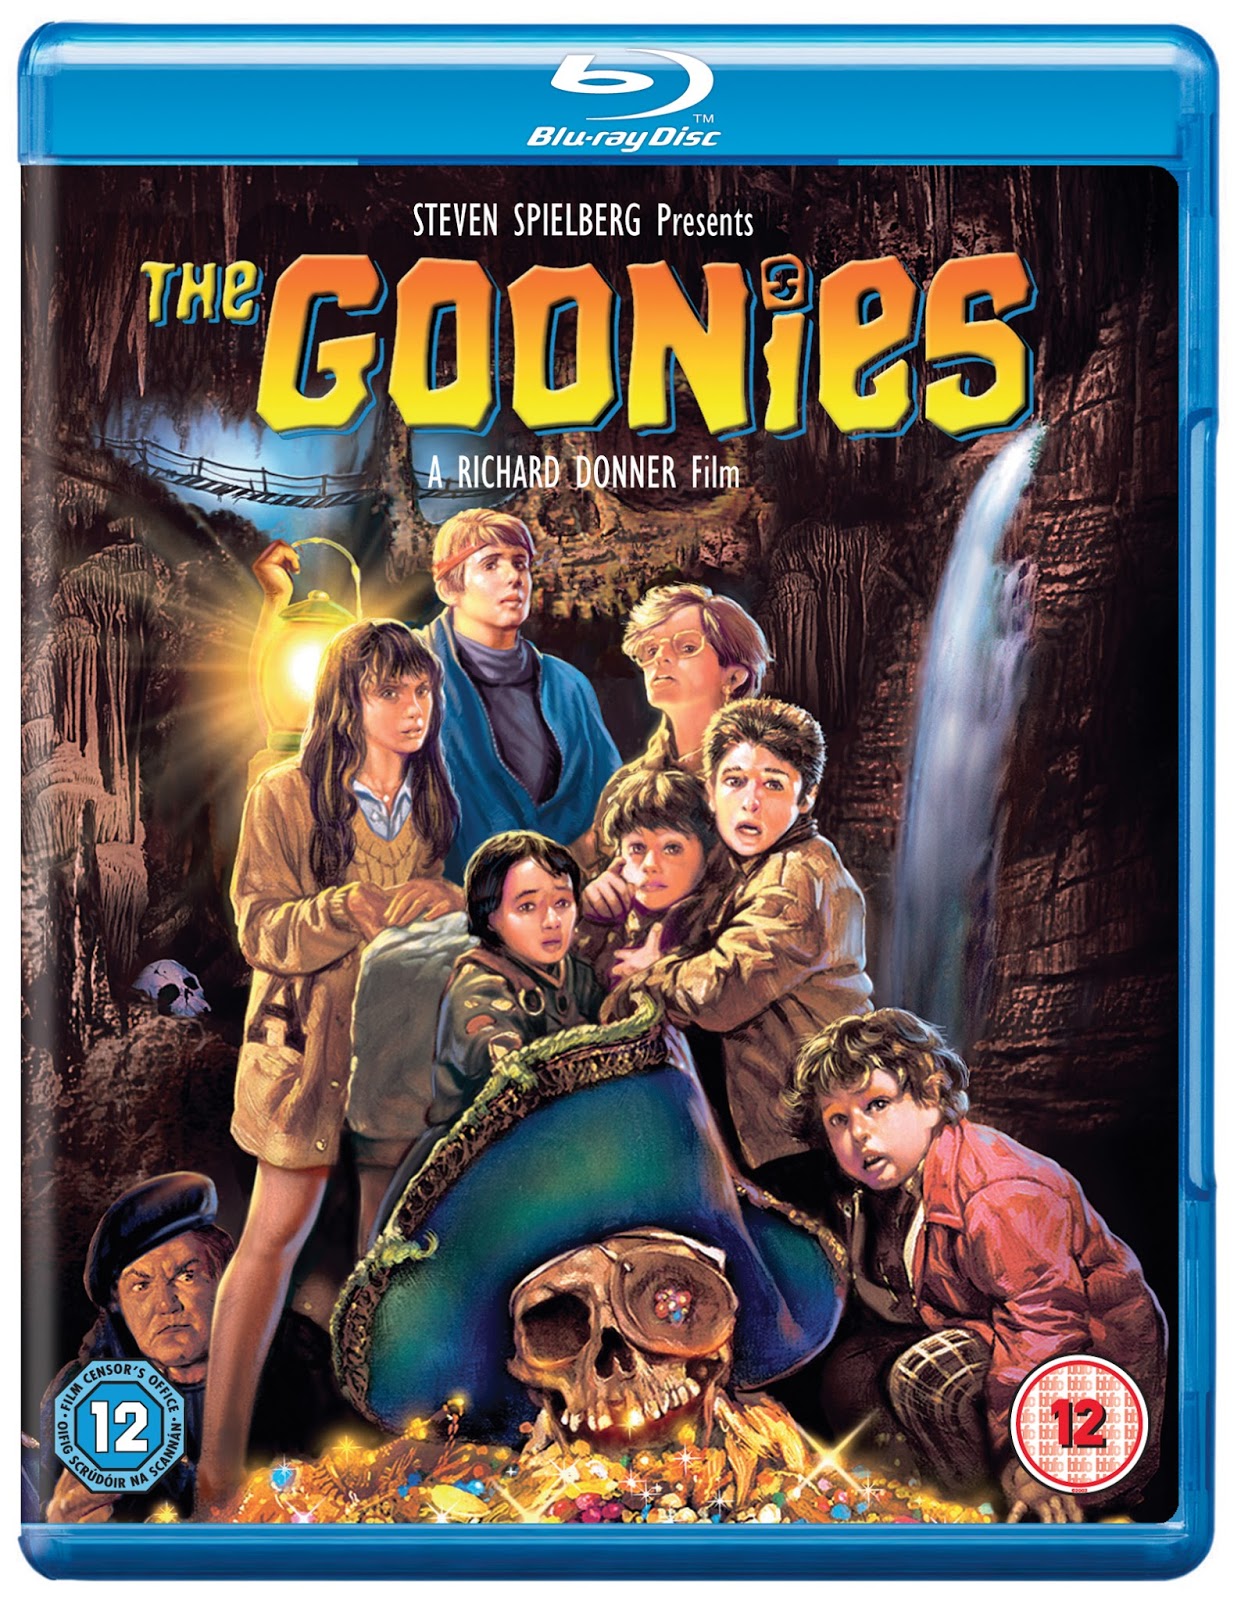 THE GOONIES 30TH ANNIVERSARY EDITION BLURAY List Of Special Features